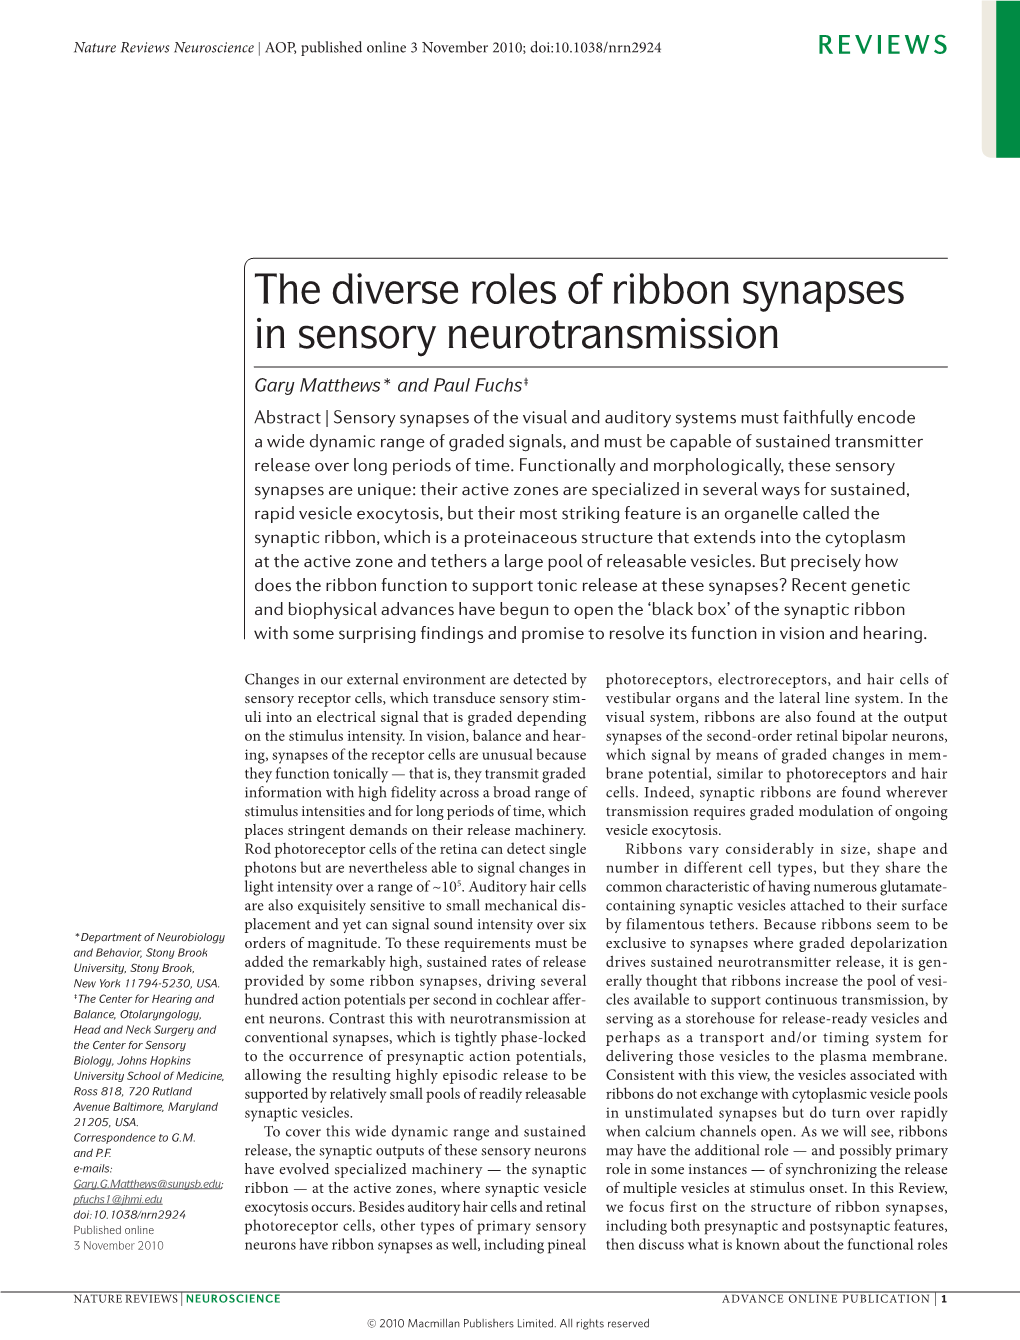 The Diverse Roles of Ribbon Synapses in Sensory Neurotransmission